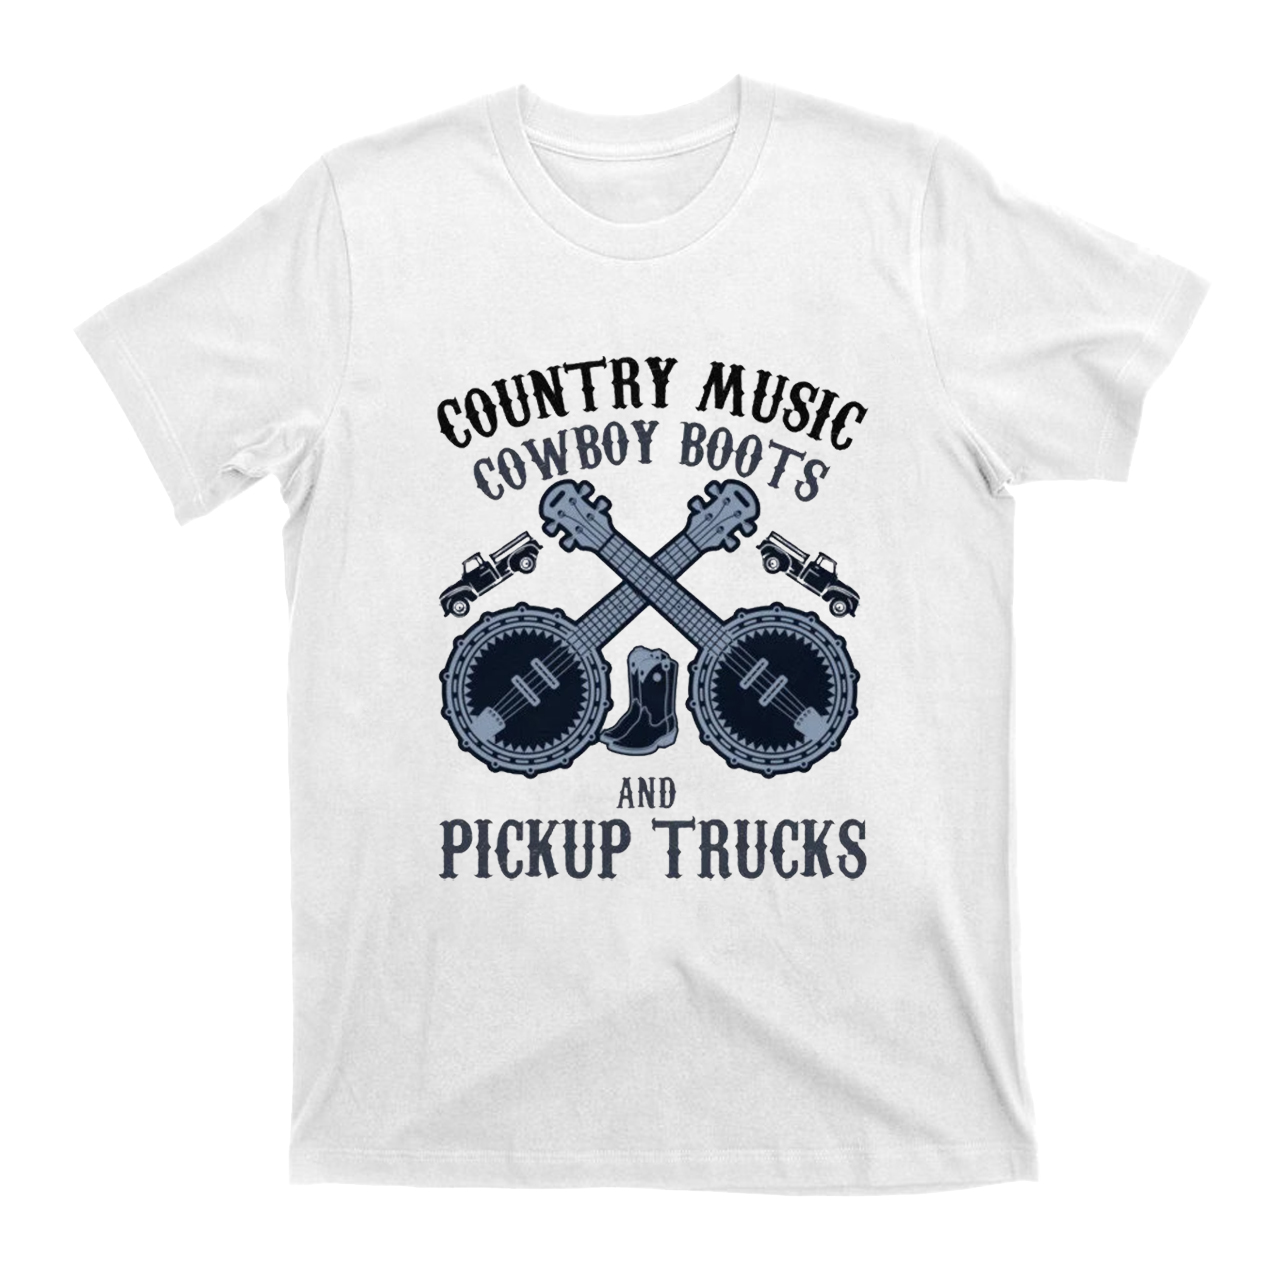 Funny Country Music Cowboy Boots Pickup Truck T-Shirts